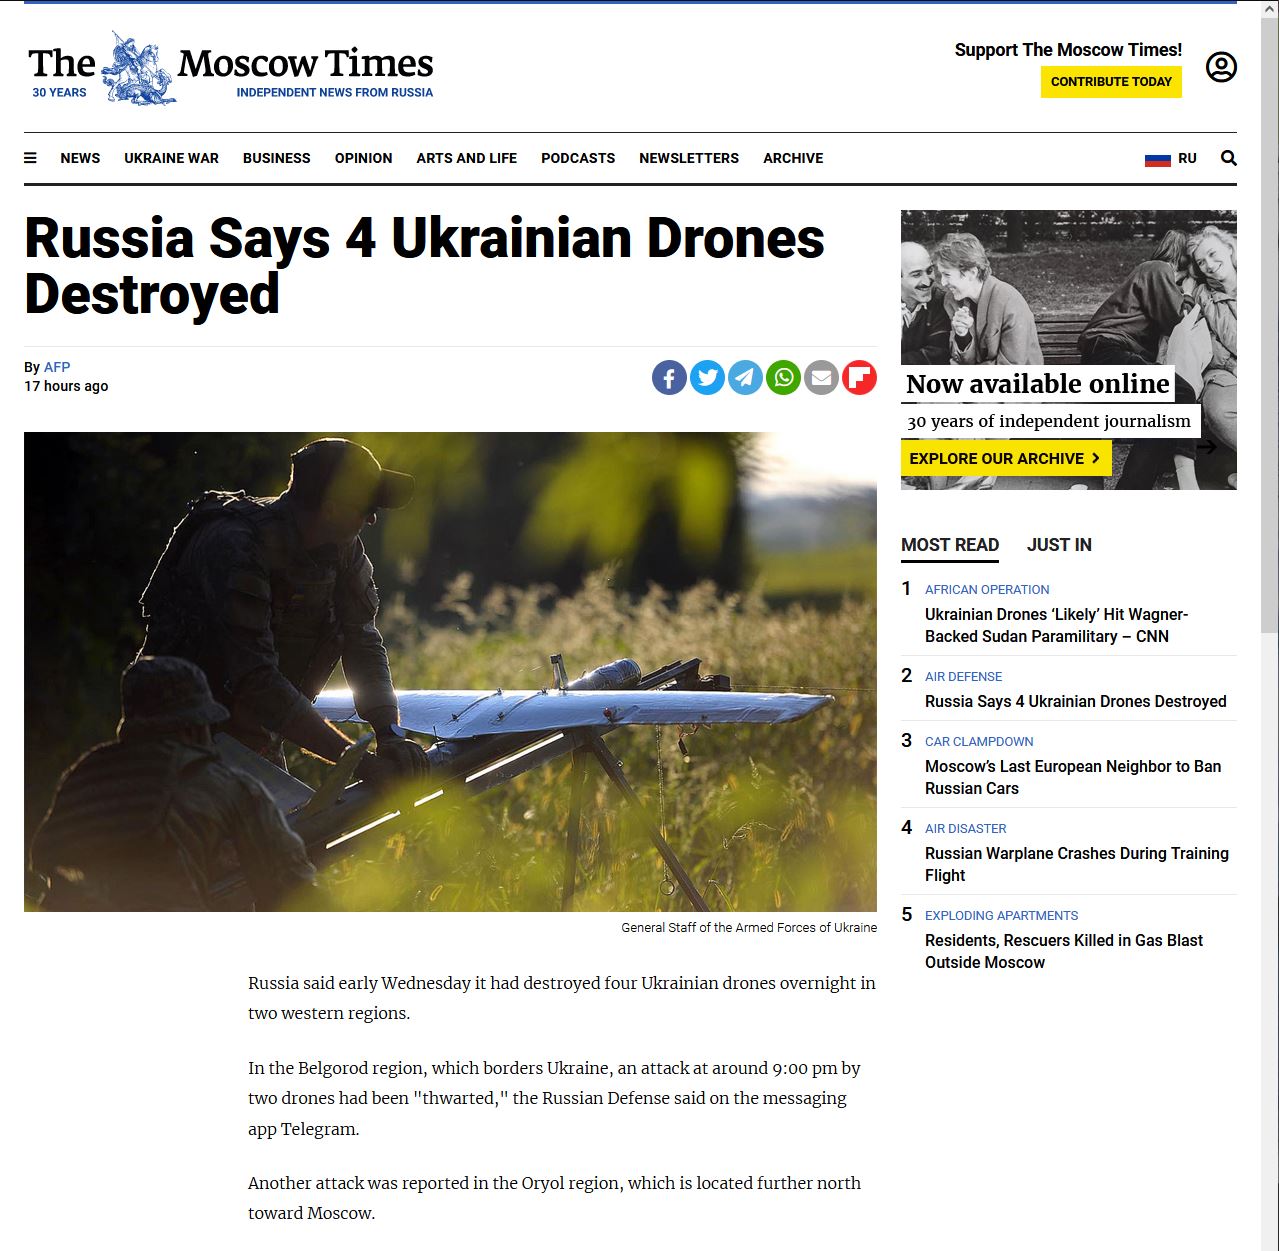 This is an article from the Moscow Times detailing Russian military successes in taking down Ukrainian drones.